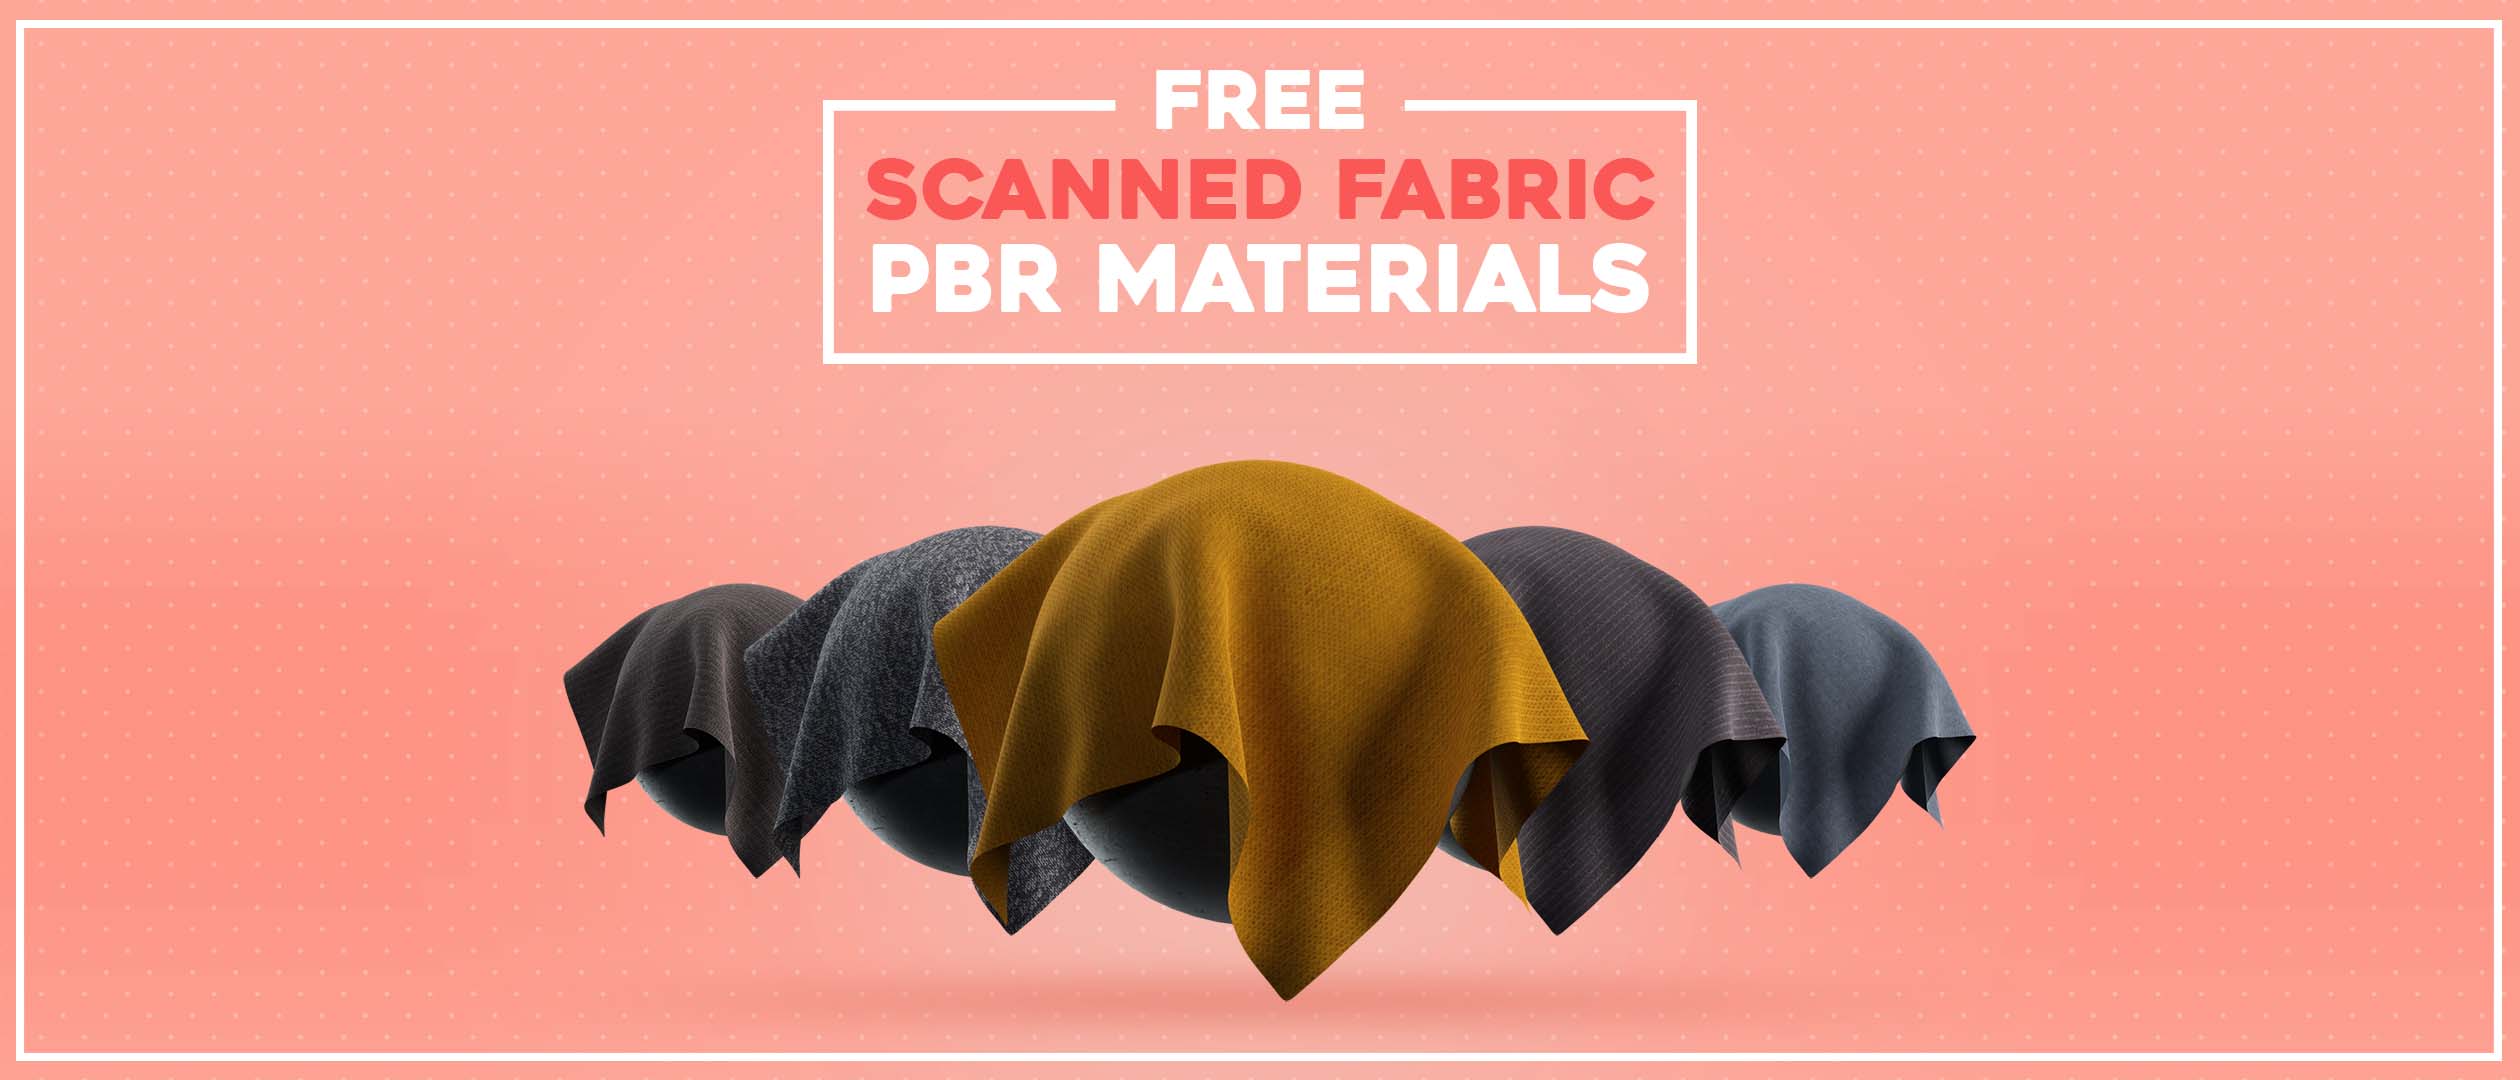 FREE Scanned Fabric PBR Materials